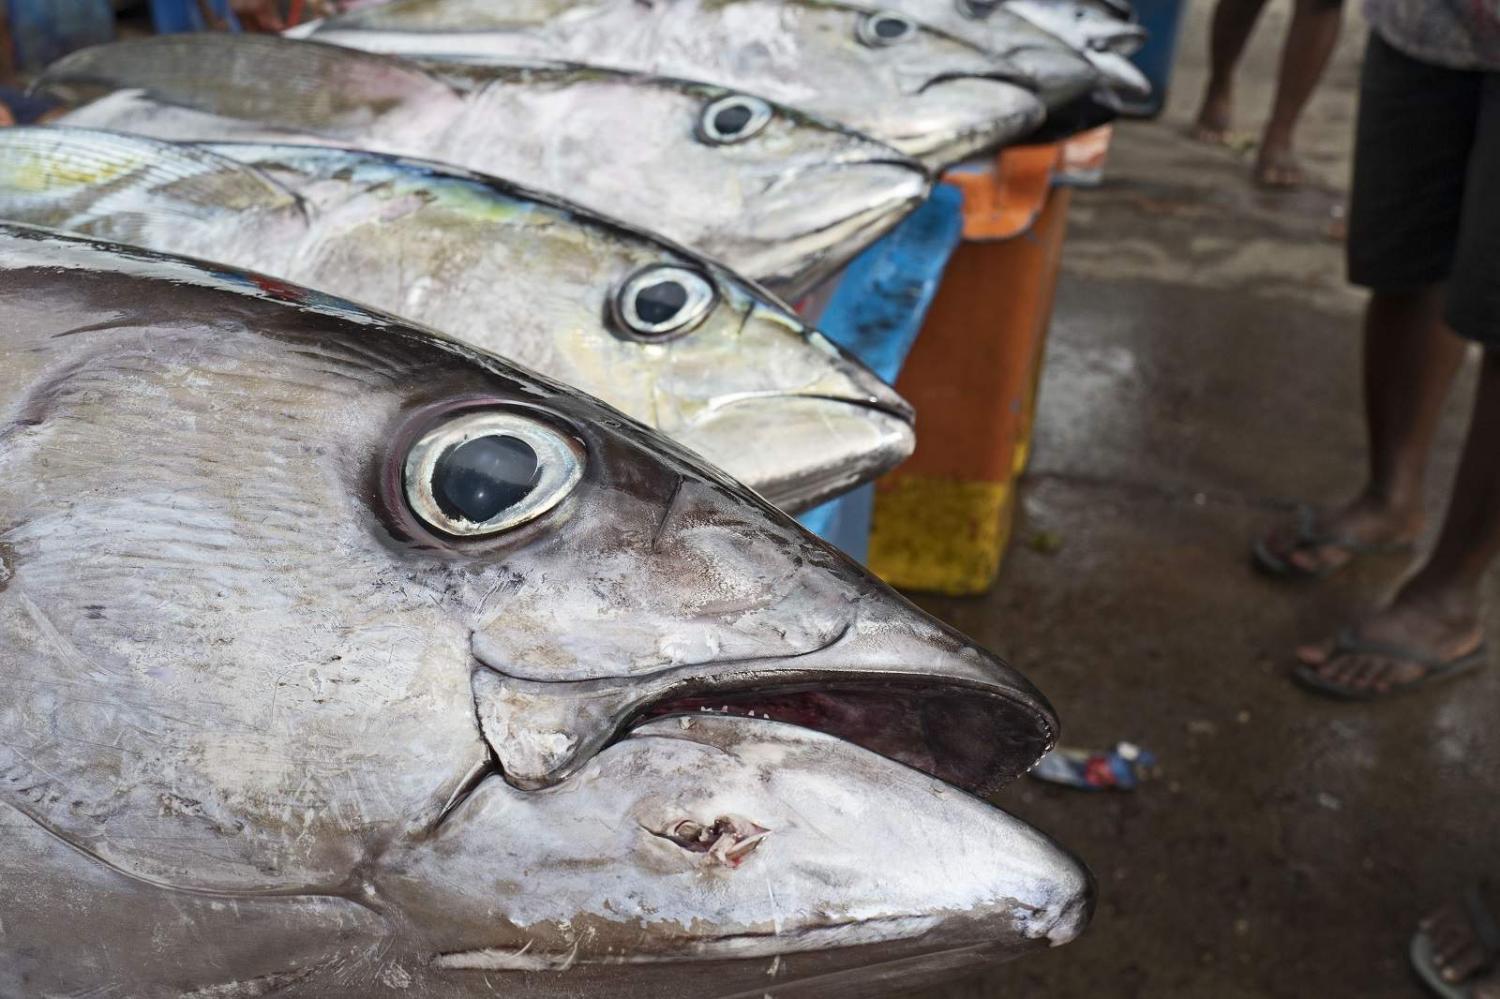 Yellowfin Tuna at a fish market in Honiara on Guadalcanal, Solomon Islands (David Tipling/Universal Images Group via Getty Images)